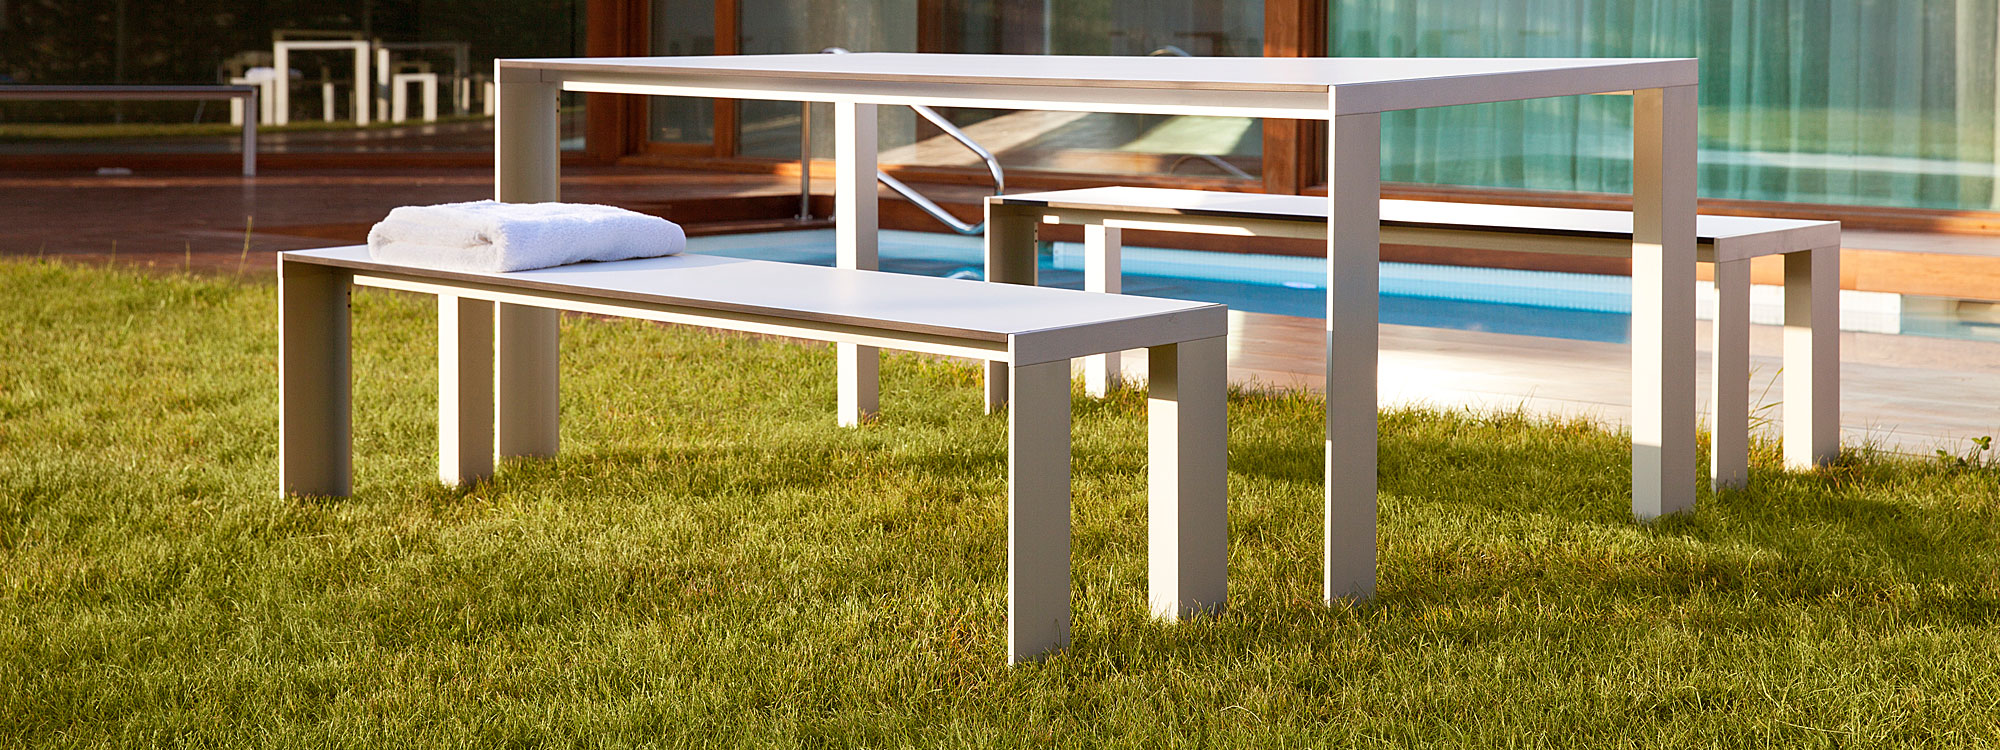 Deneb minimalist tables and benches are suitable for residential & contract use & are made by Stua high quality garden furniture materials.